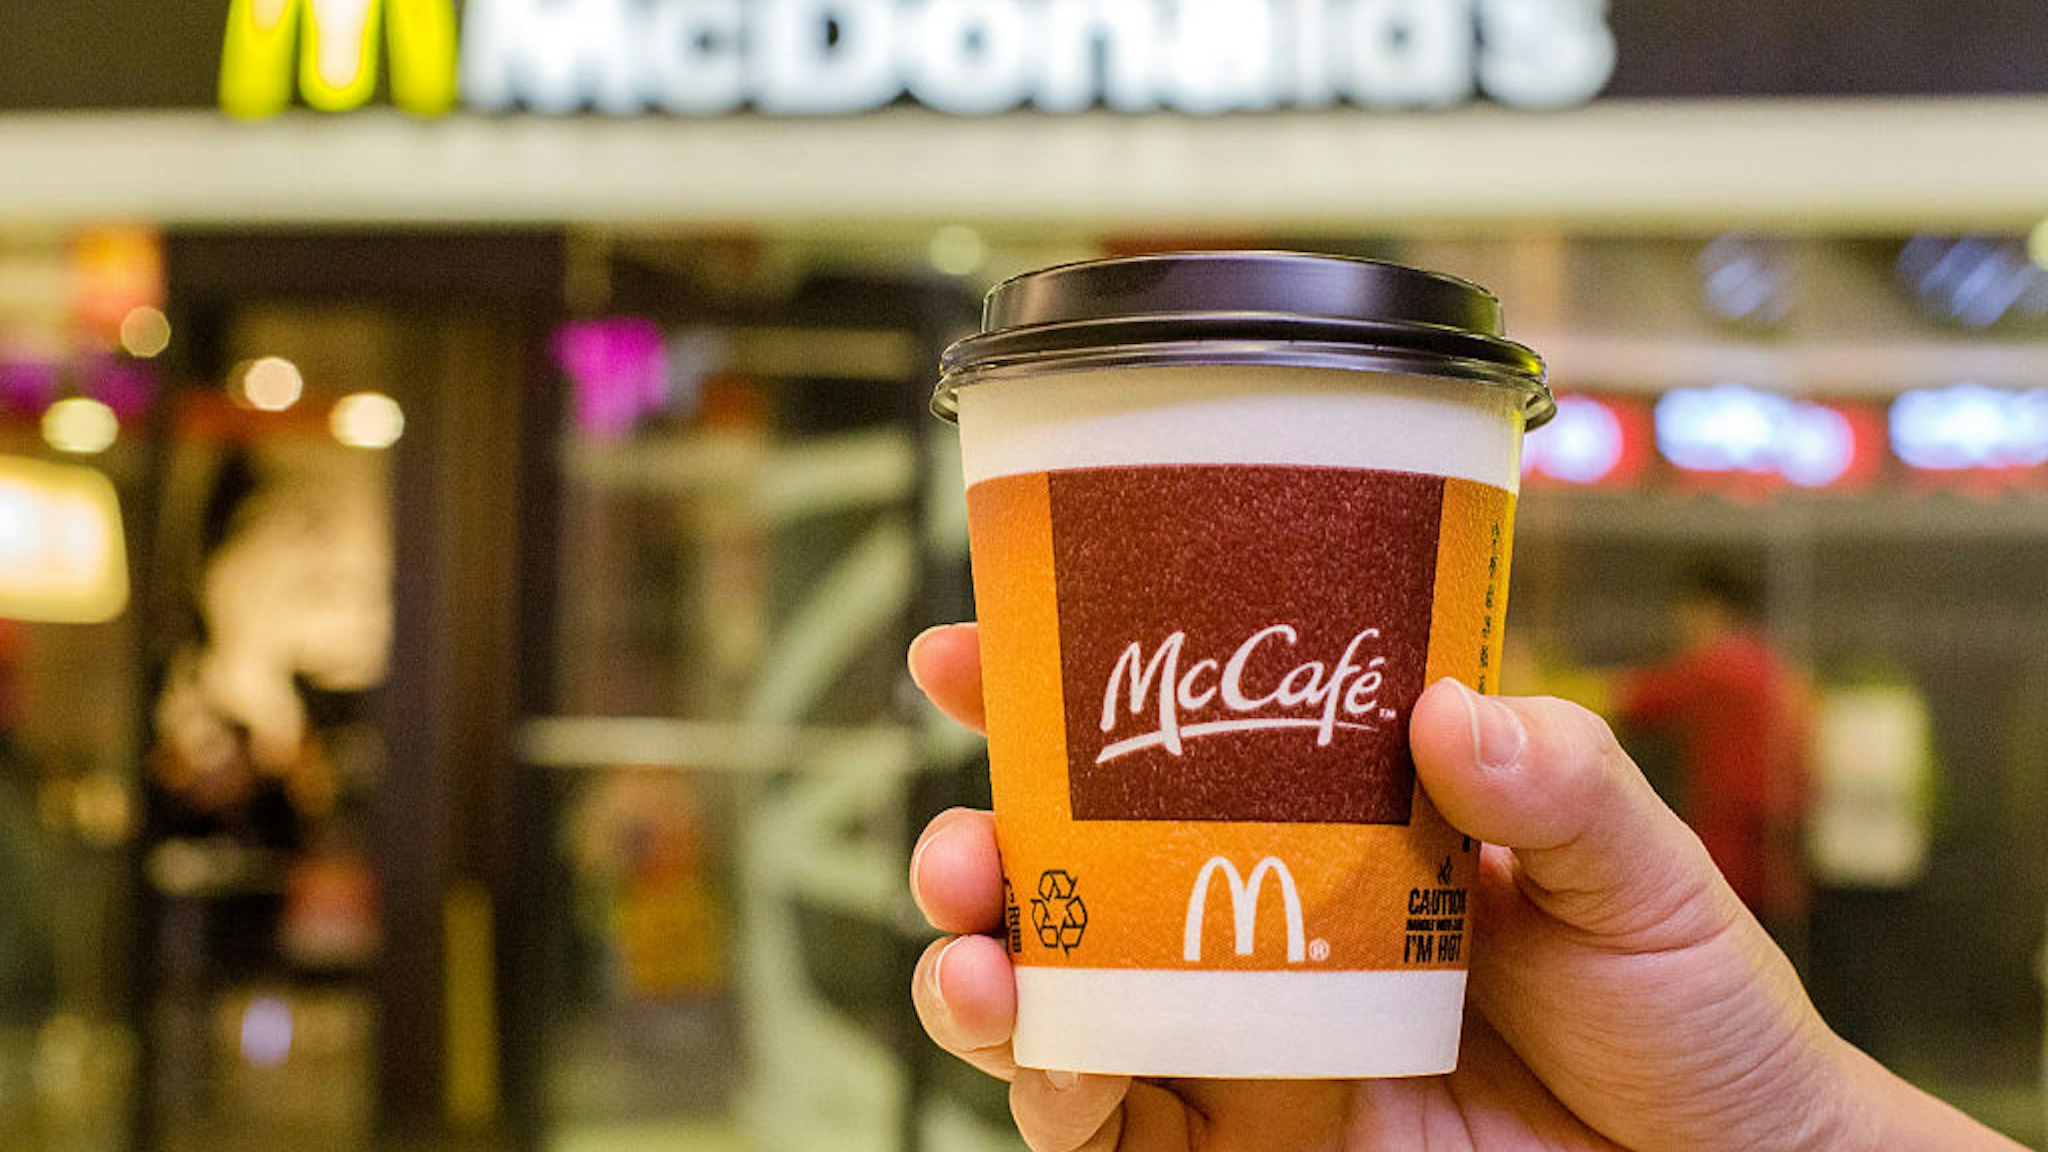 A customer holds a cup of Coffee served by McCafe out of a McDonald's restaurant.